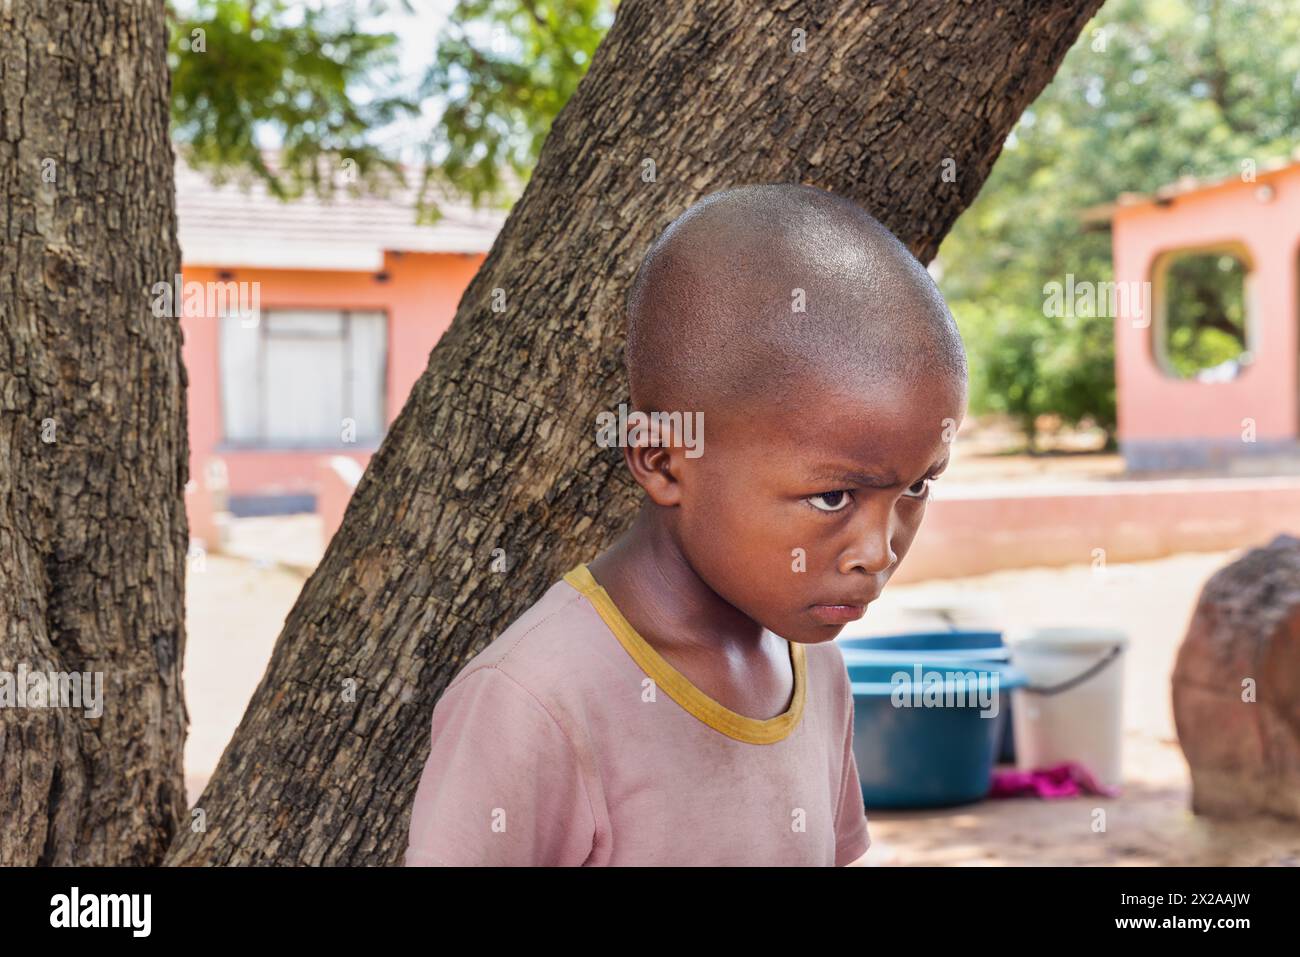 abused upset village african child, hiding behind a tree, standing in front of the house, Stock Photo